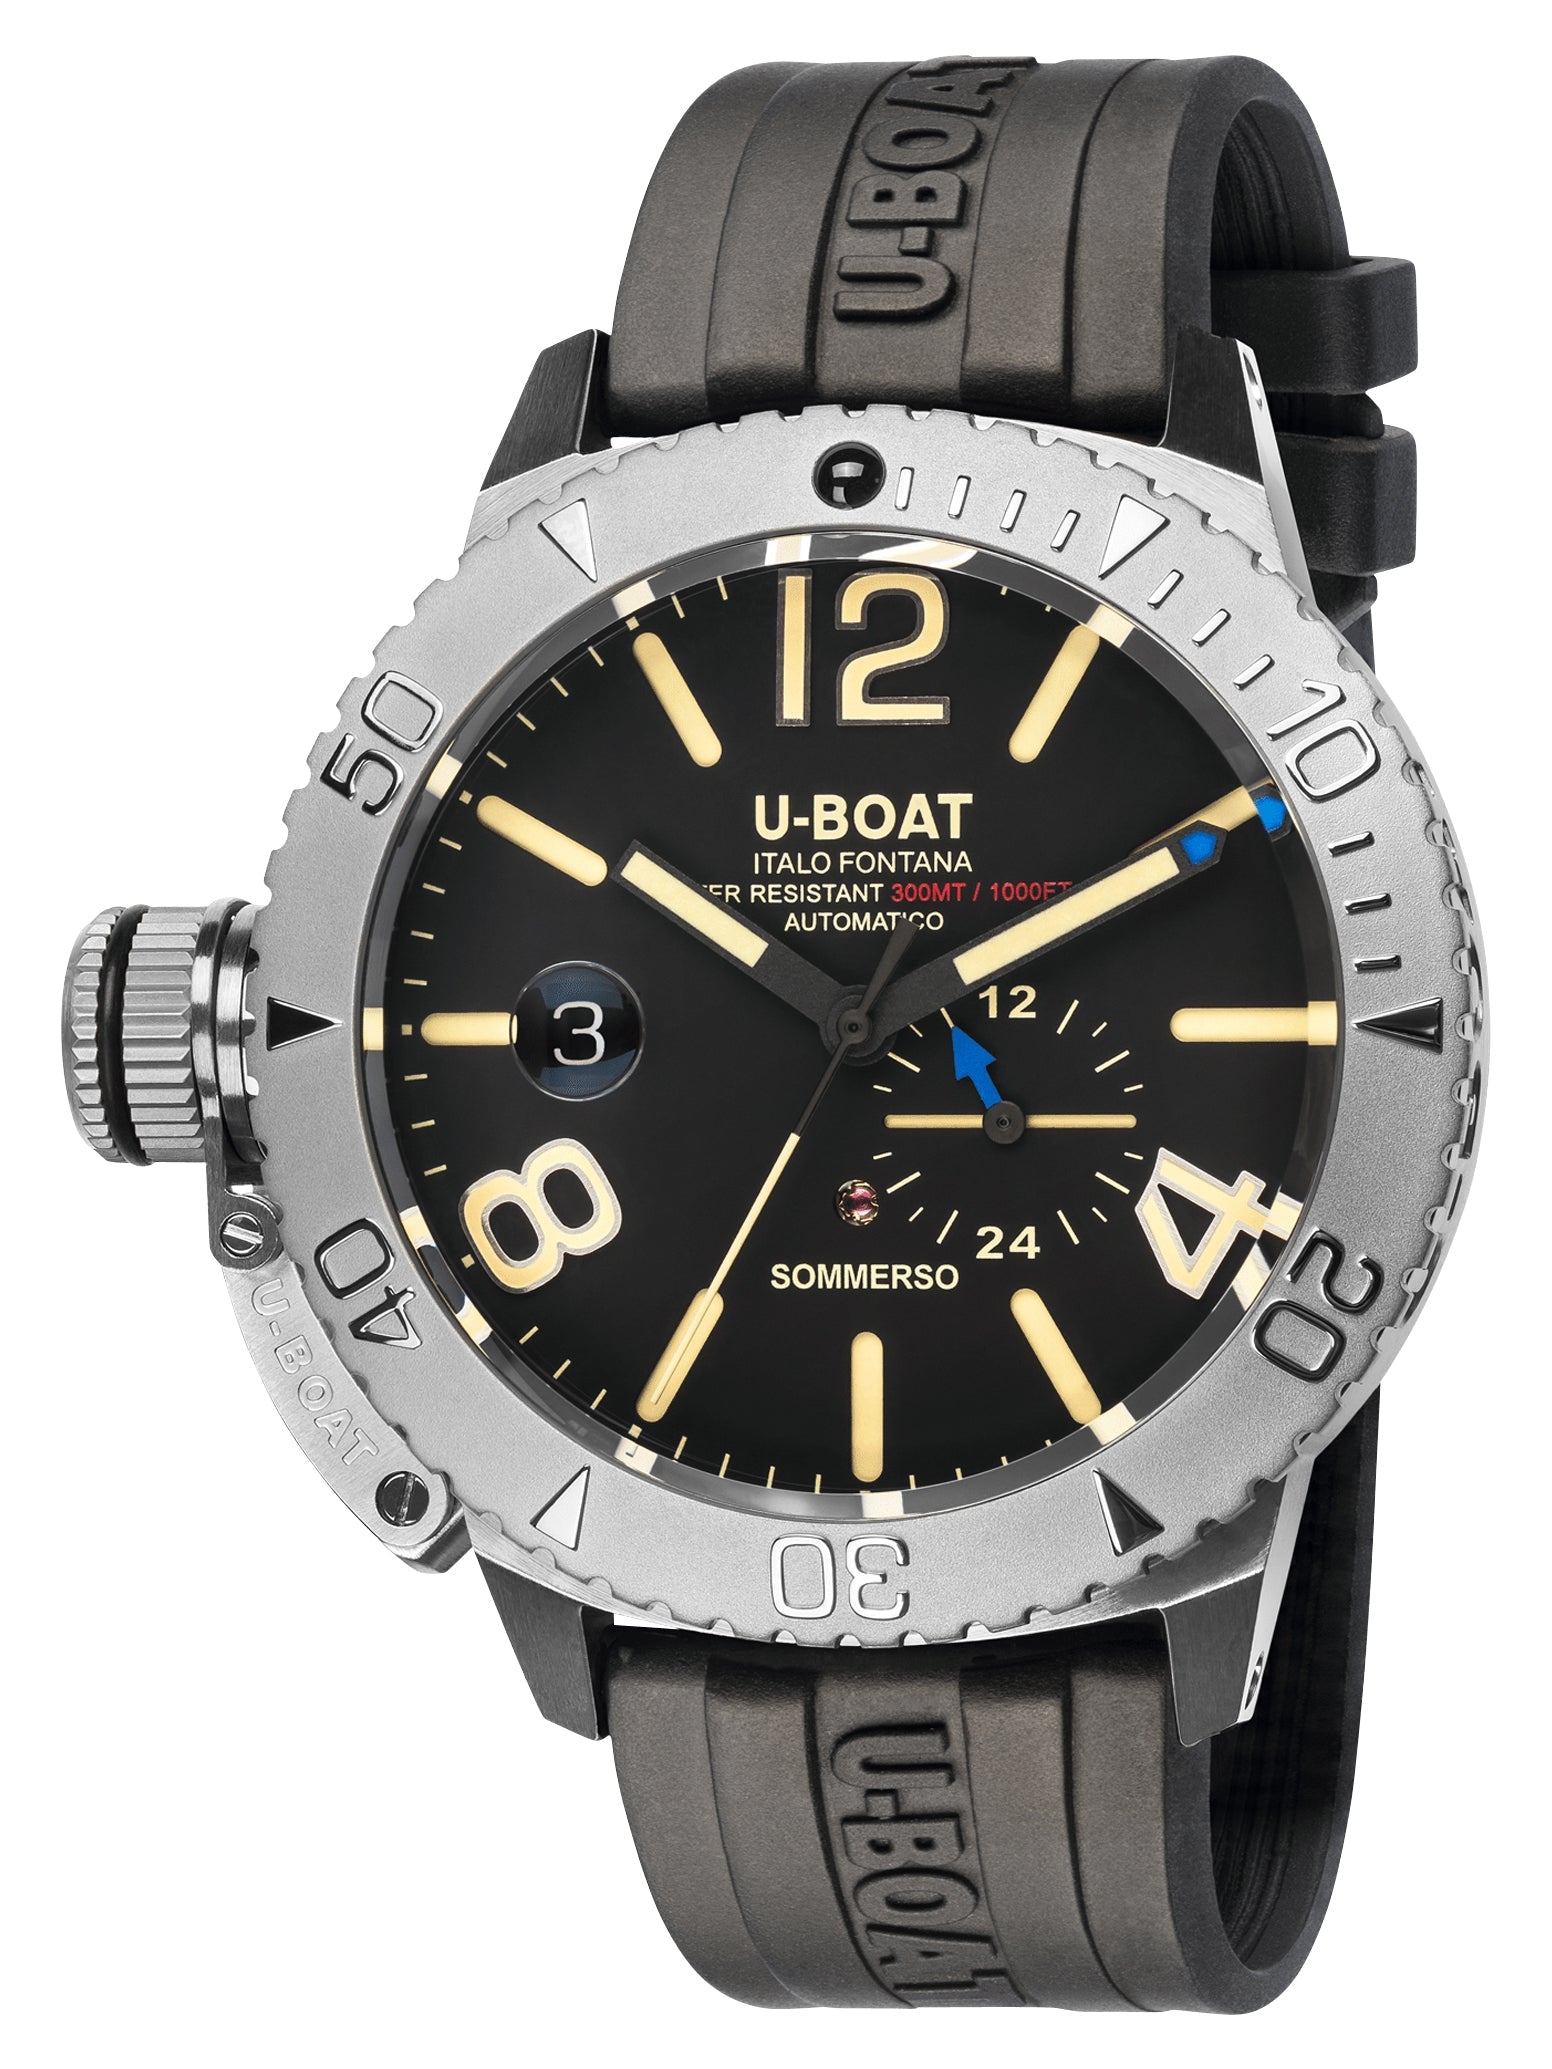 update alt-text with template Watches - Mens-U-Boat-9007-24-hour display, 45 - 50 mm, black, date, day/night indicator, divers, mens, menswatches, new arrivals, round, rpSKU_8527, rpSKU_8890, rpSKU_8891, rpSKU_8893, rpSKU_9015, rubber, Sommerso, stainless steel case, swiss automatic, U-Boat, uni-directional rotating bezel, watches-Watches & Beyond